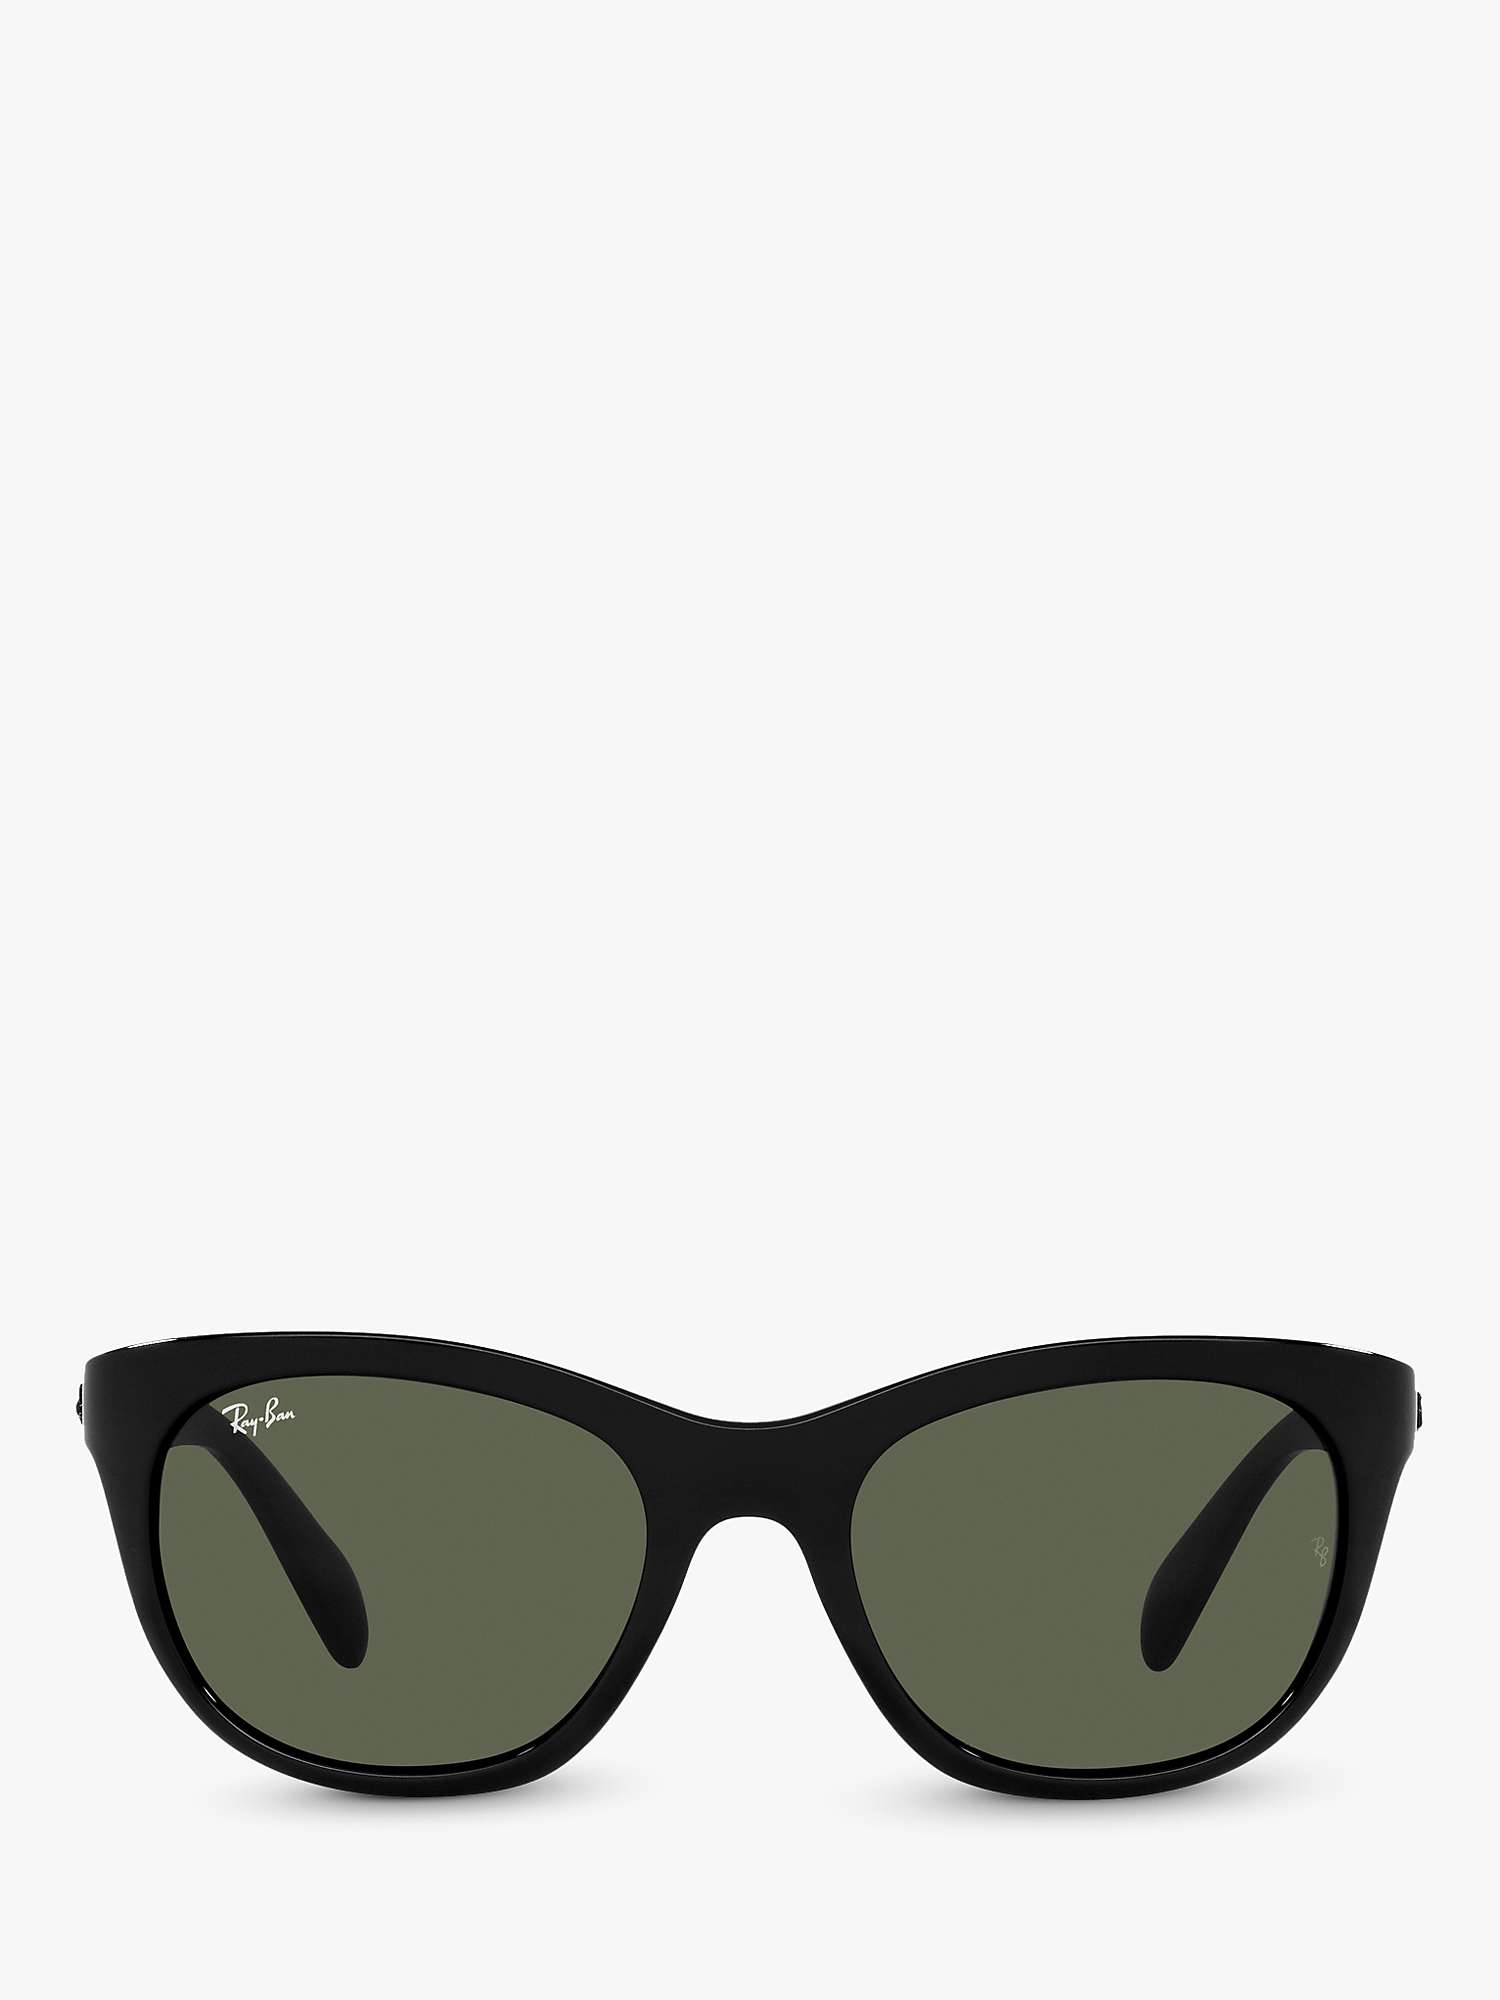 Buy Ray-Ban RB4216 Women's Square Sunglasses, Black/Green Online at johnlewis.com